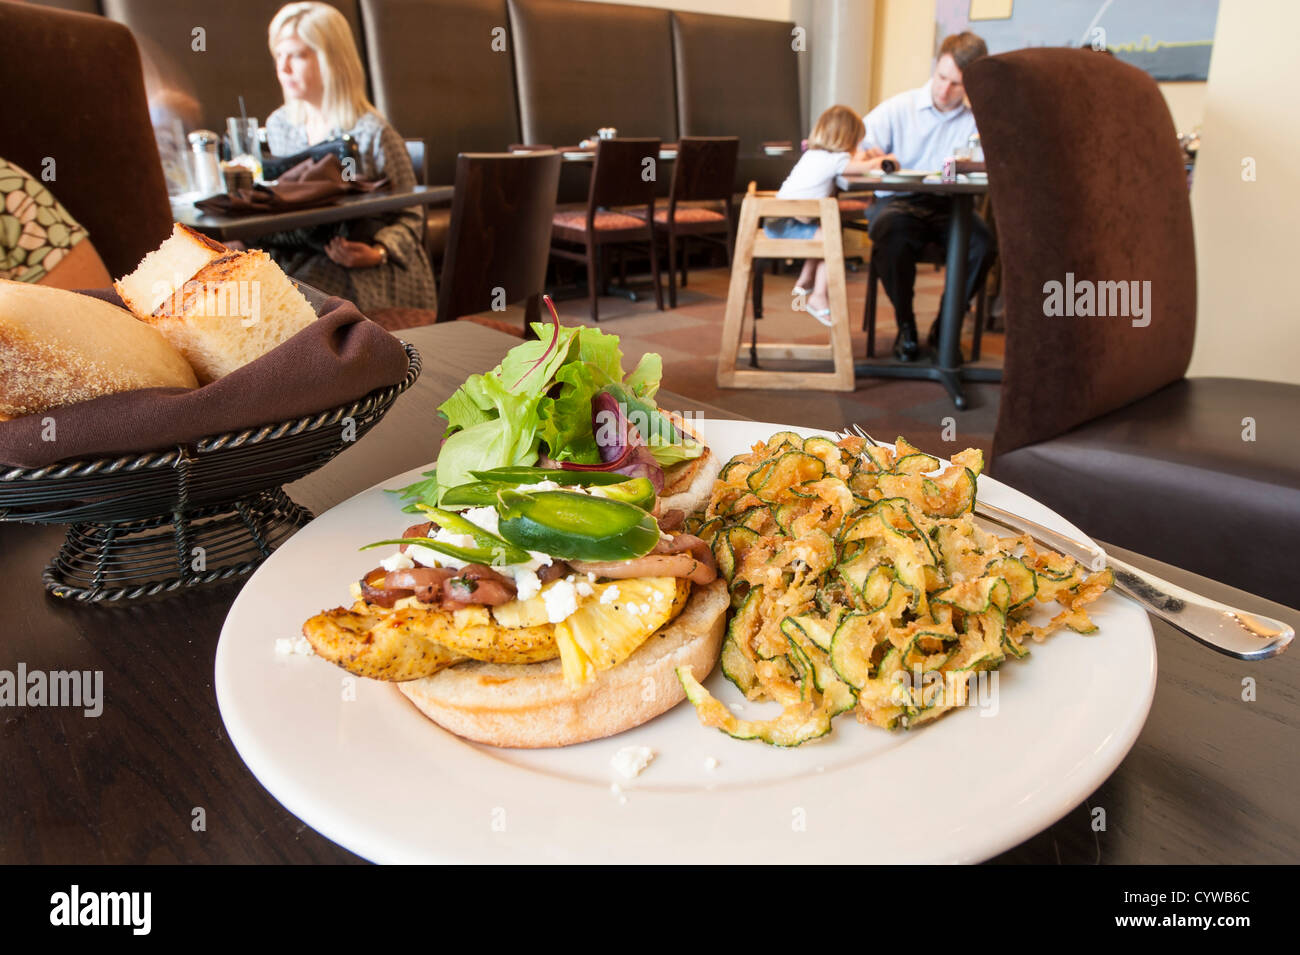 Chicken sandwich with fried zucchini at a restaurant in Orlando, Florida. Stock Photo